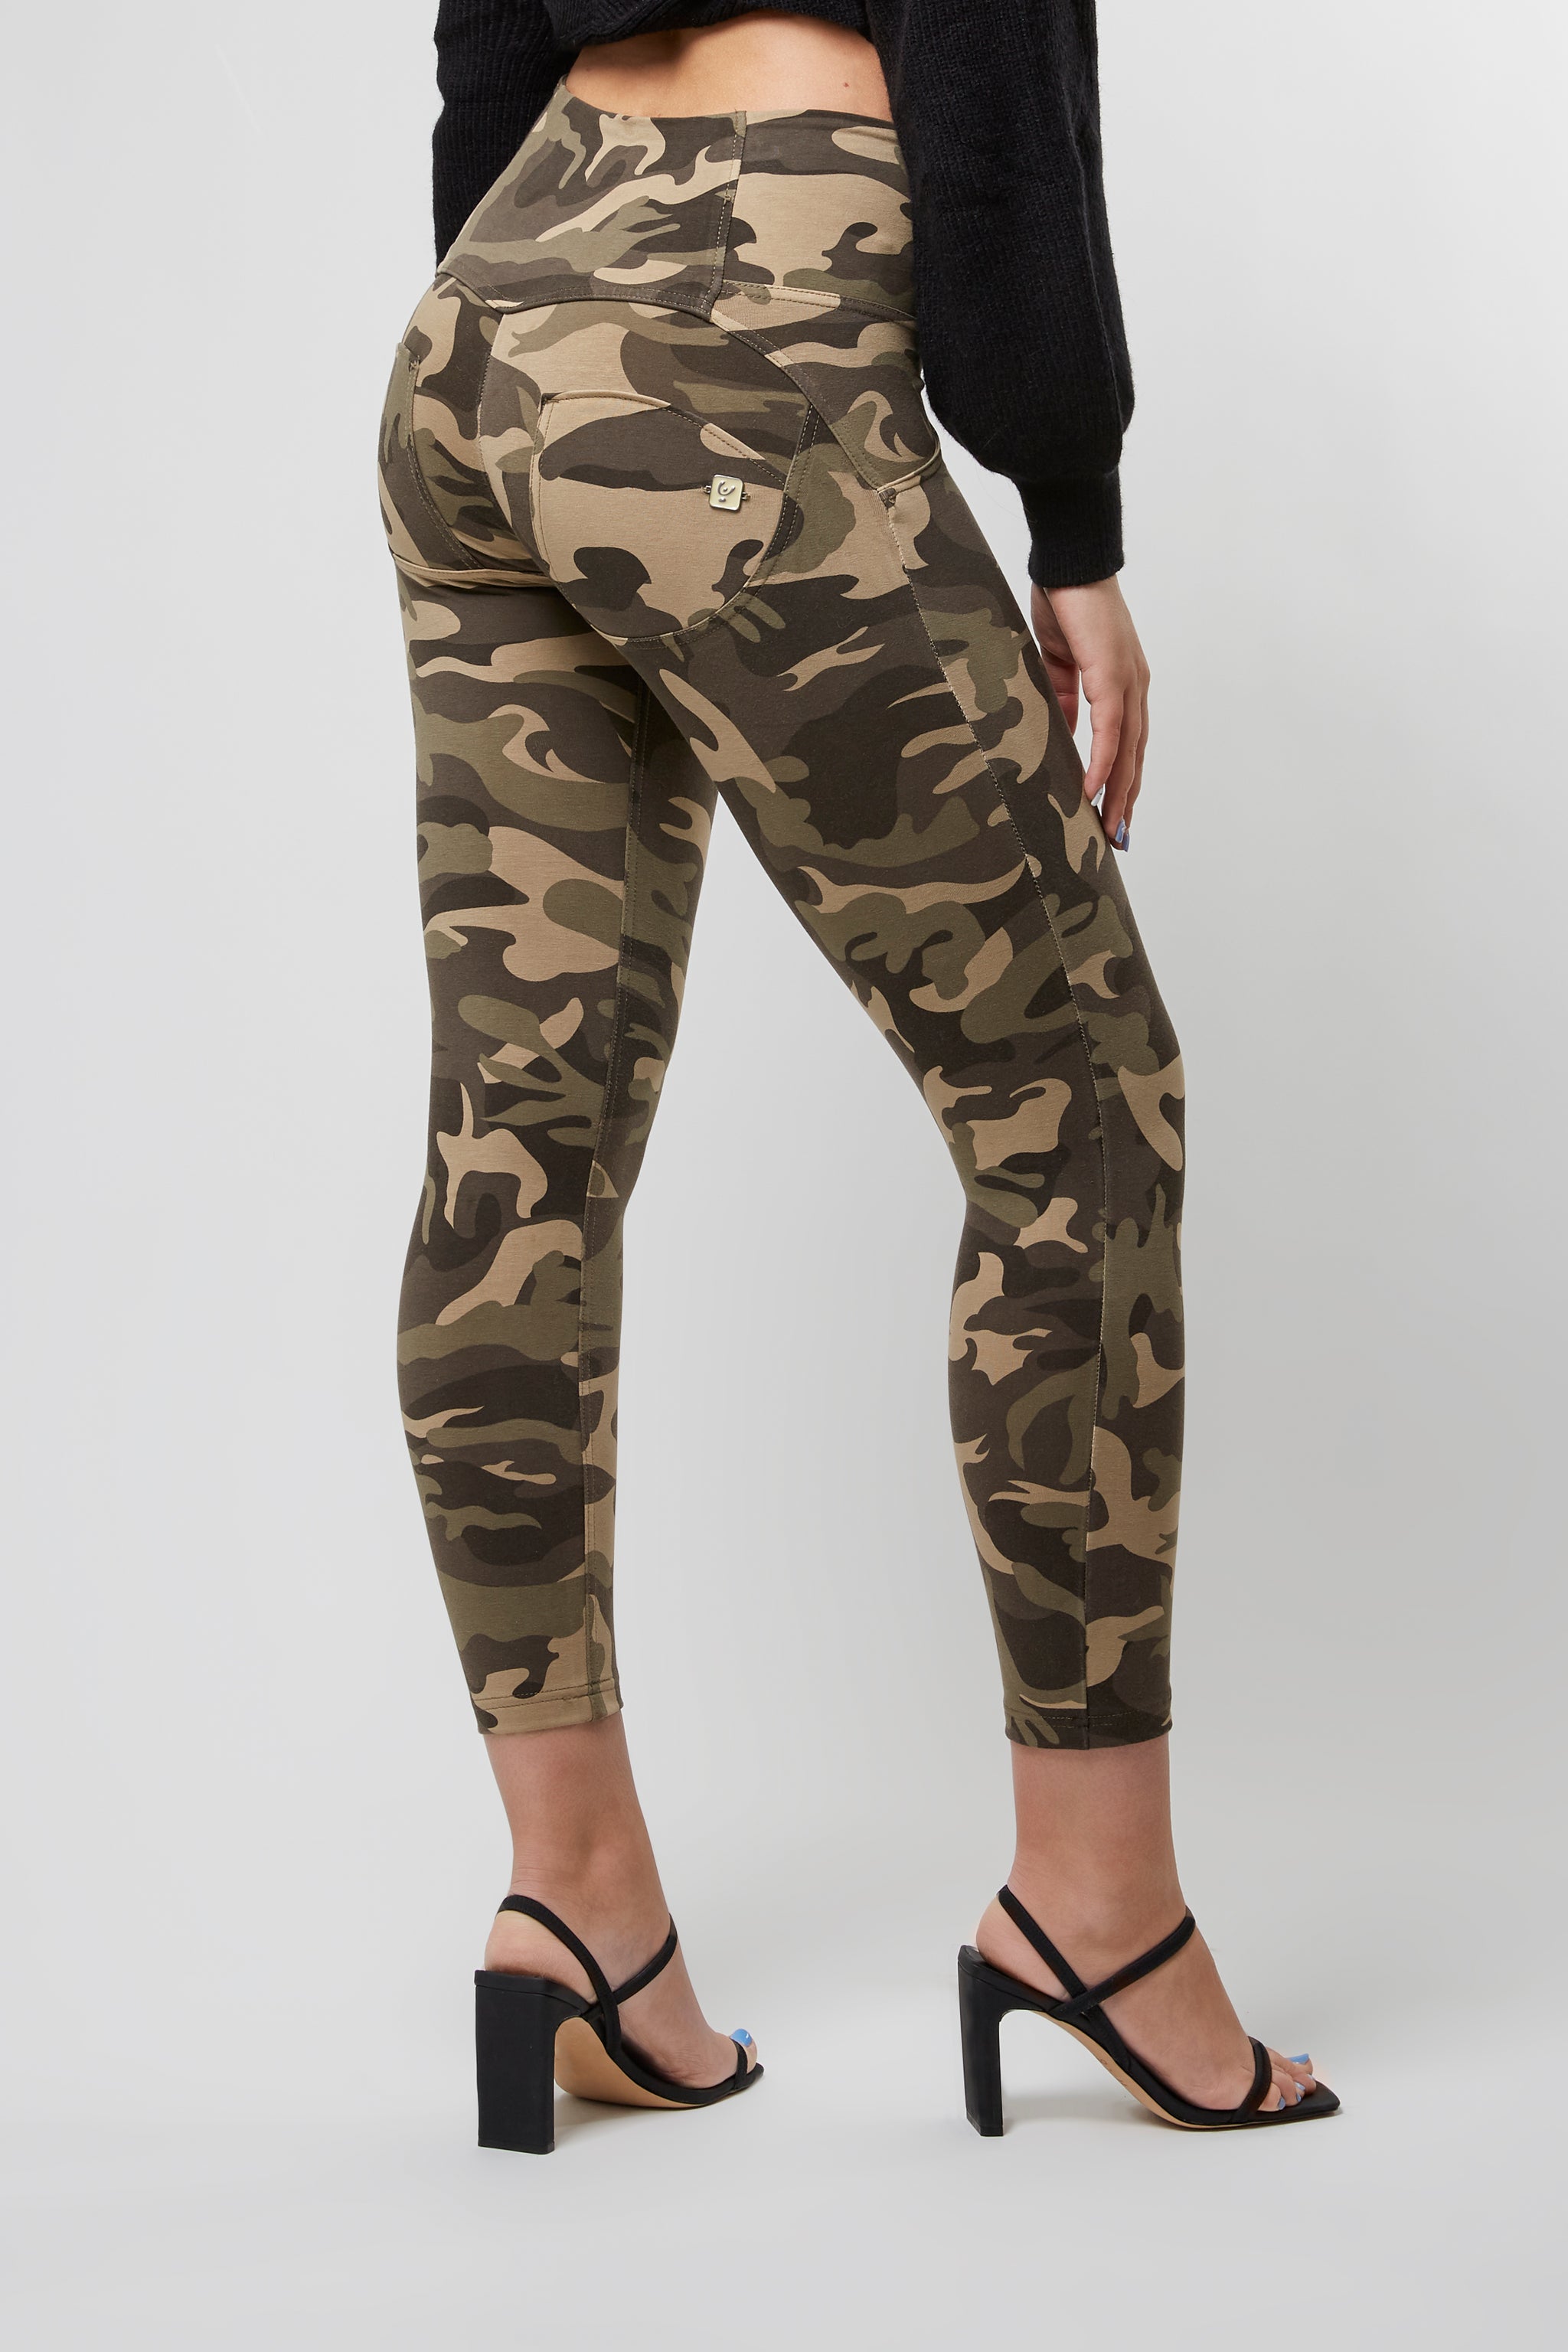 SPANX Women's Look at me Now Seamless Leggings Heather Camo (XS) :  : Clothing, Shoes & Accessories